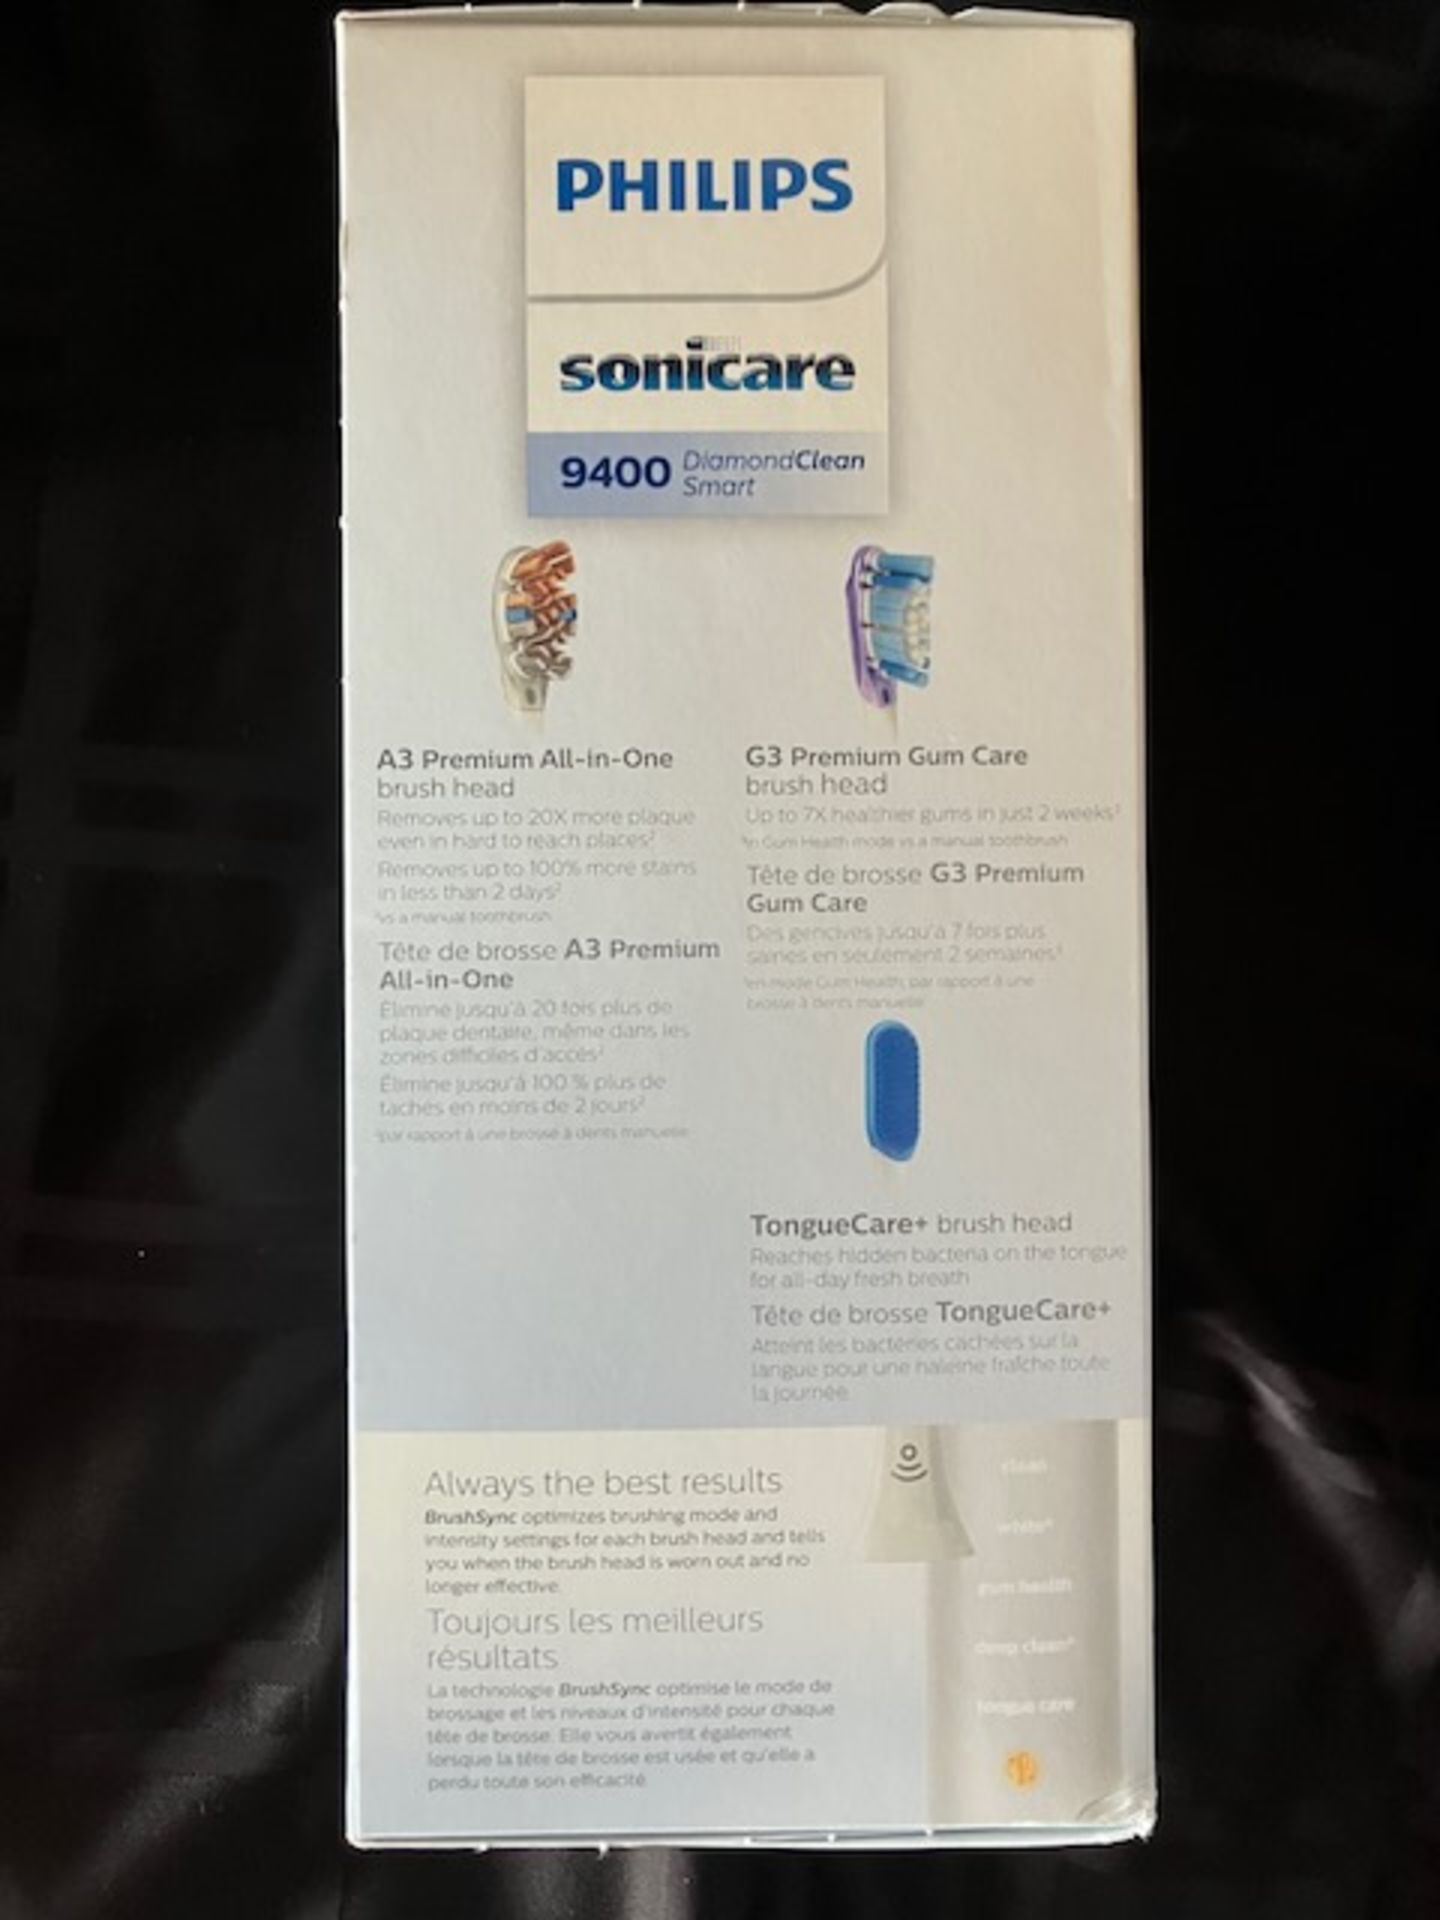 SONICARE 9400 DIAMOND CLEAN SMART POWER TOOTHBRUSH - Image 4 of 4